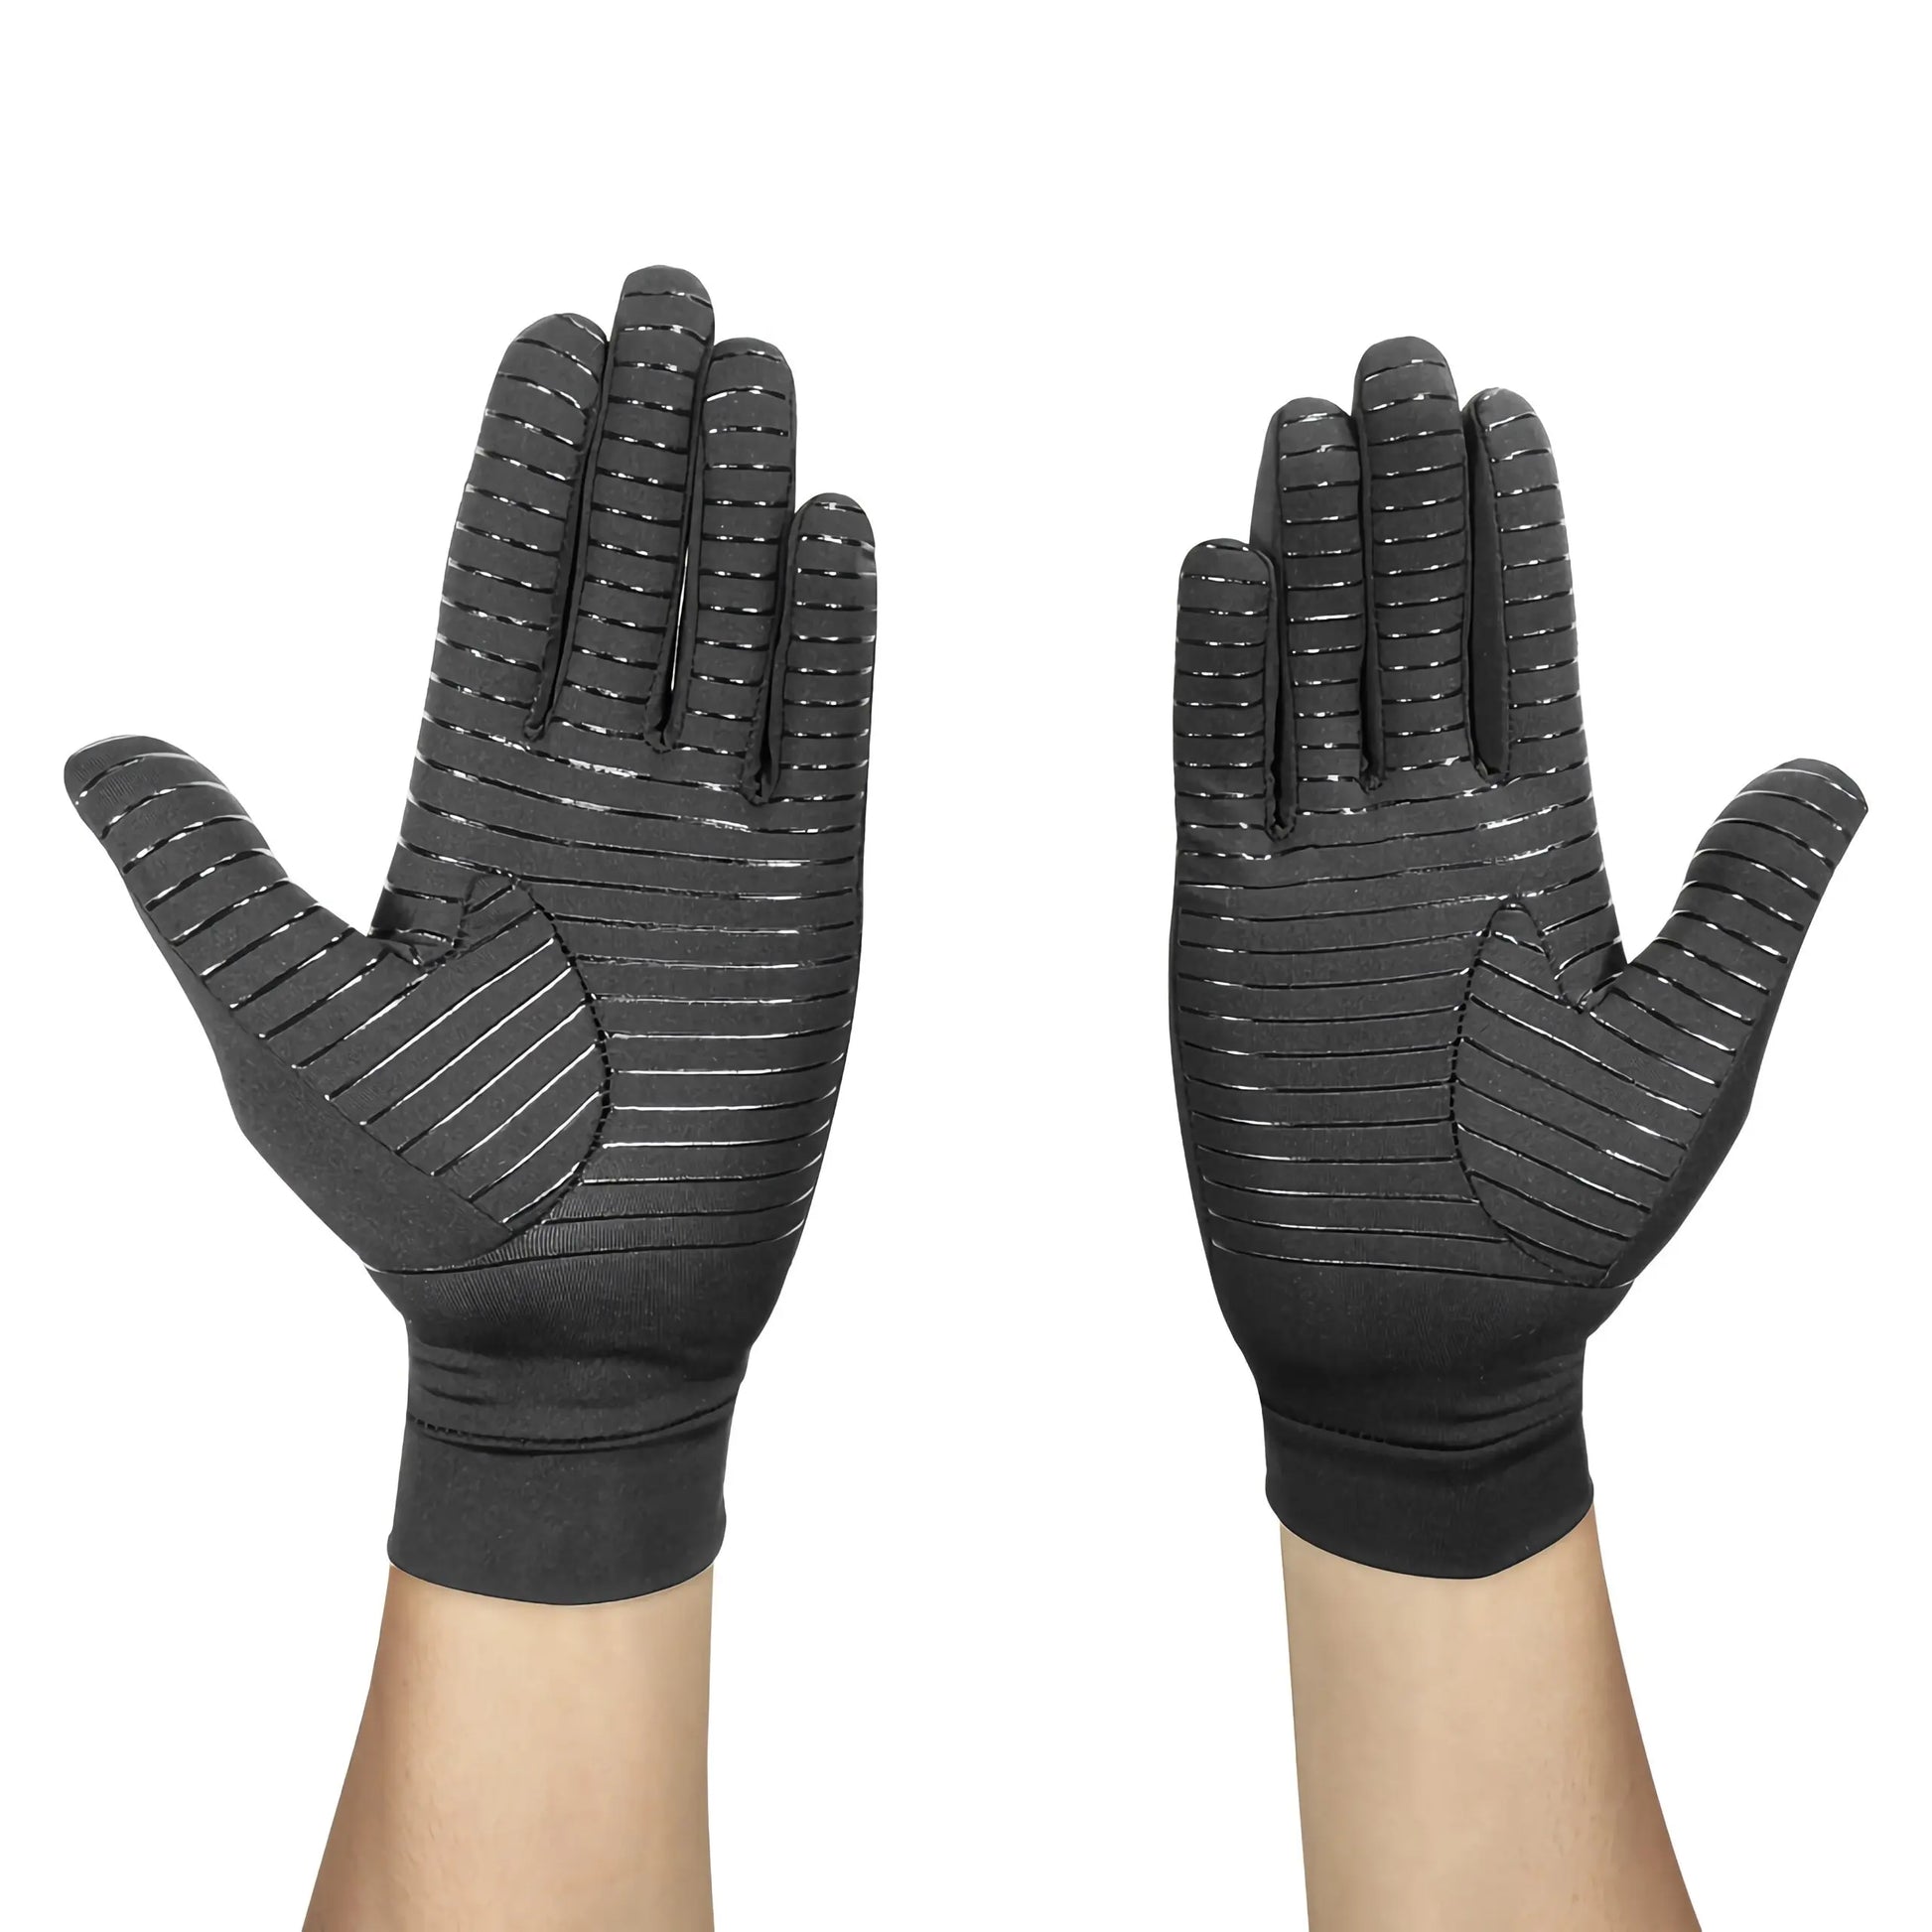 https://www.mmiproducts.co.uk/cdn/shop/files/Copper-Comfy--Copper-Infused-Compression-Gloves-MMi-Products-UK-1691071378654.jpg?v=1691071379&width=1946